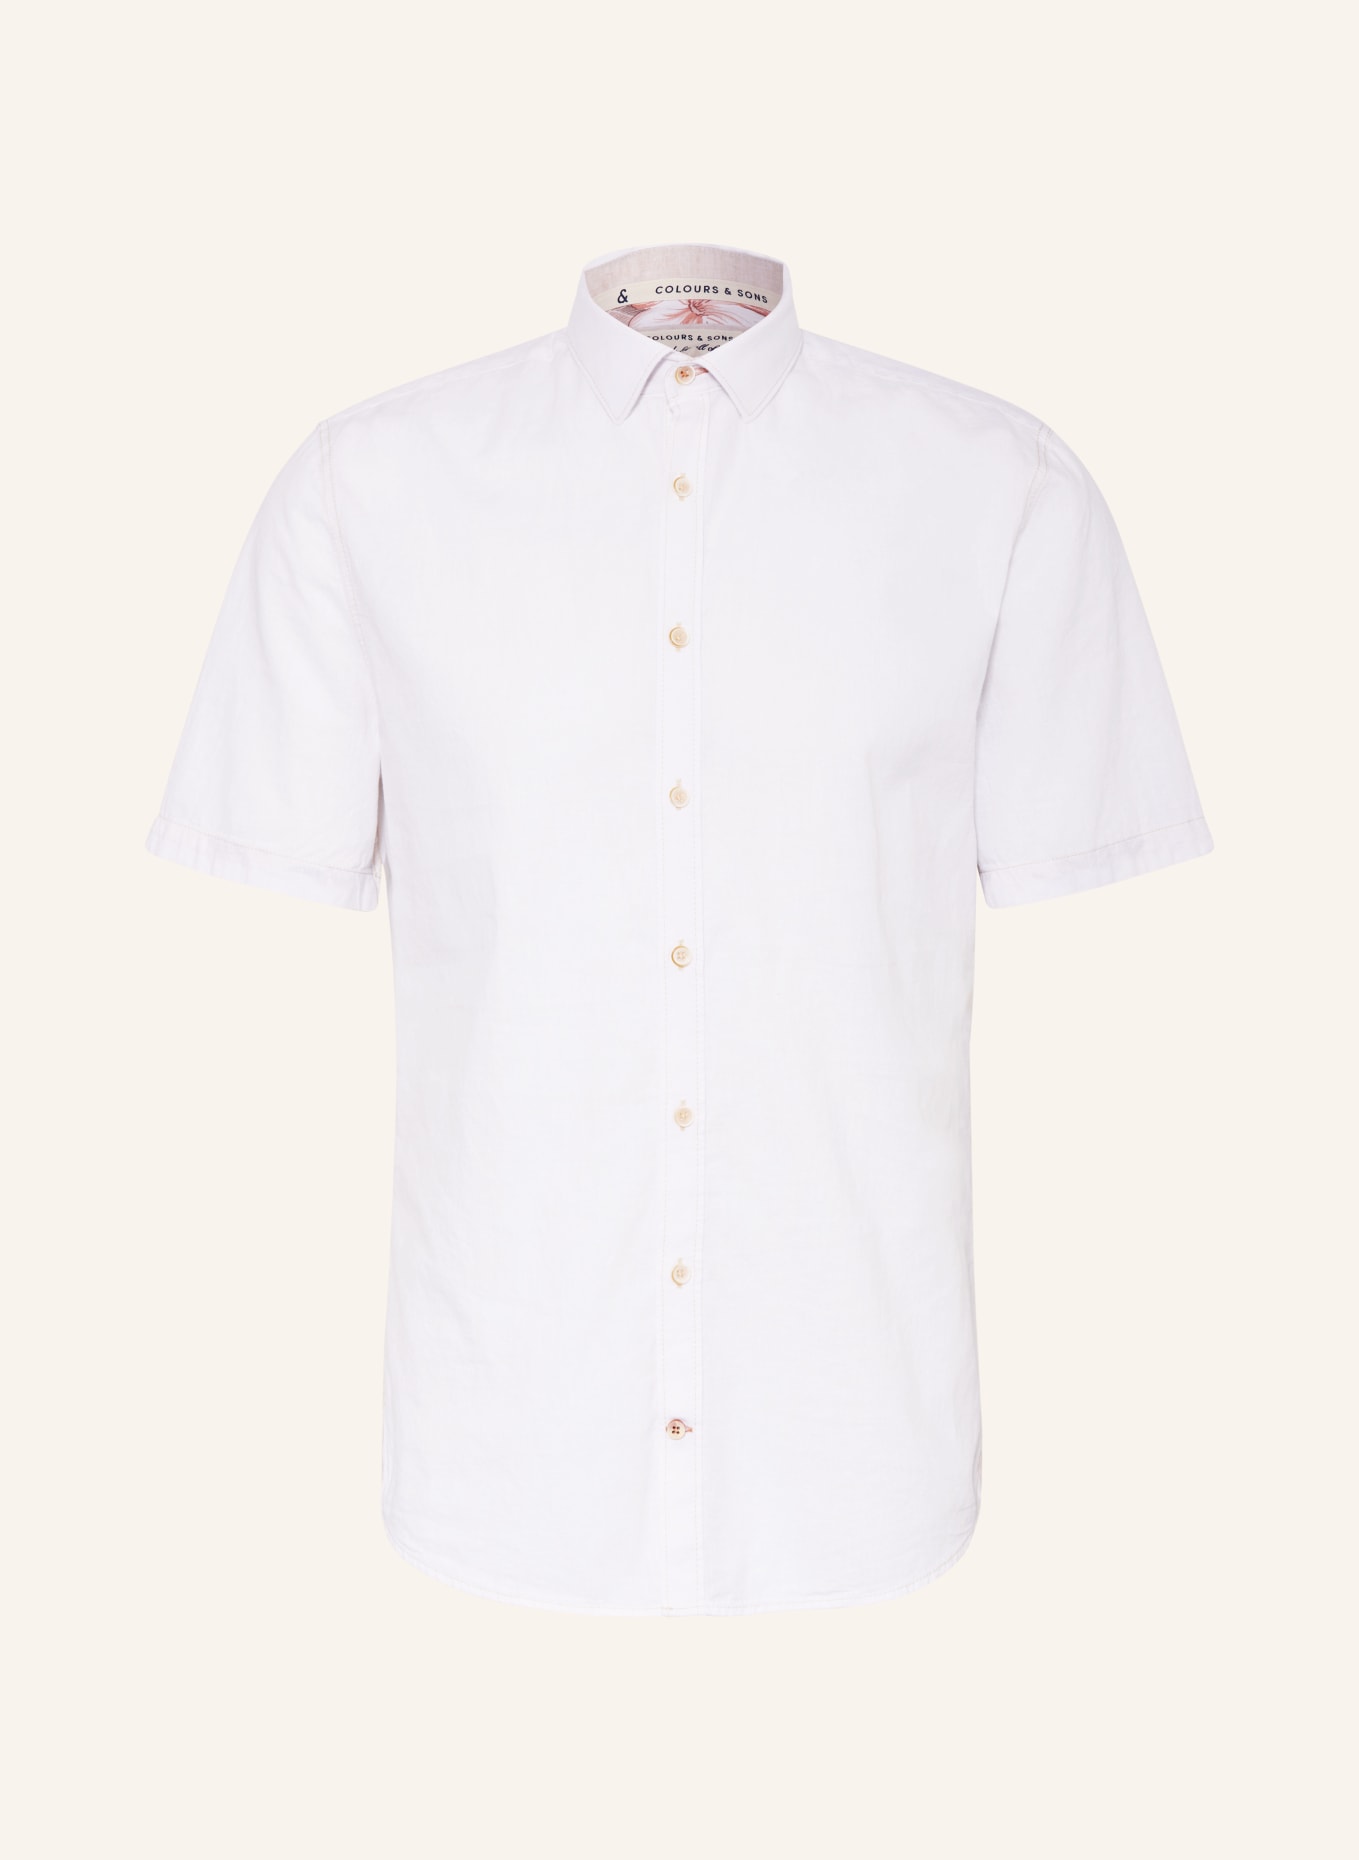 COLOURS & SONS Short sleeve shirt regular fit with linen, Color: WHITE (Image 1)